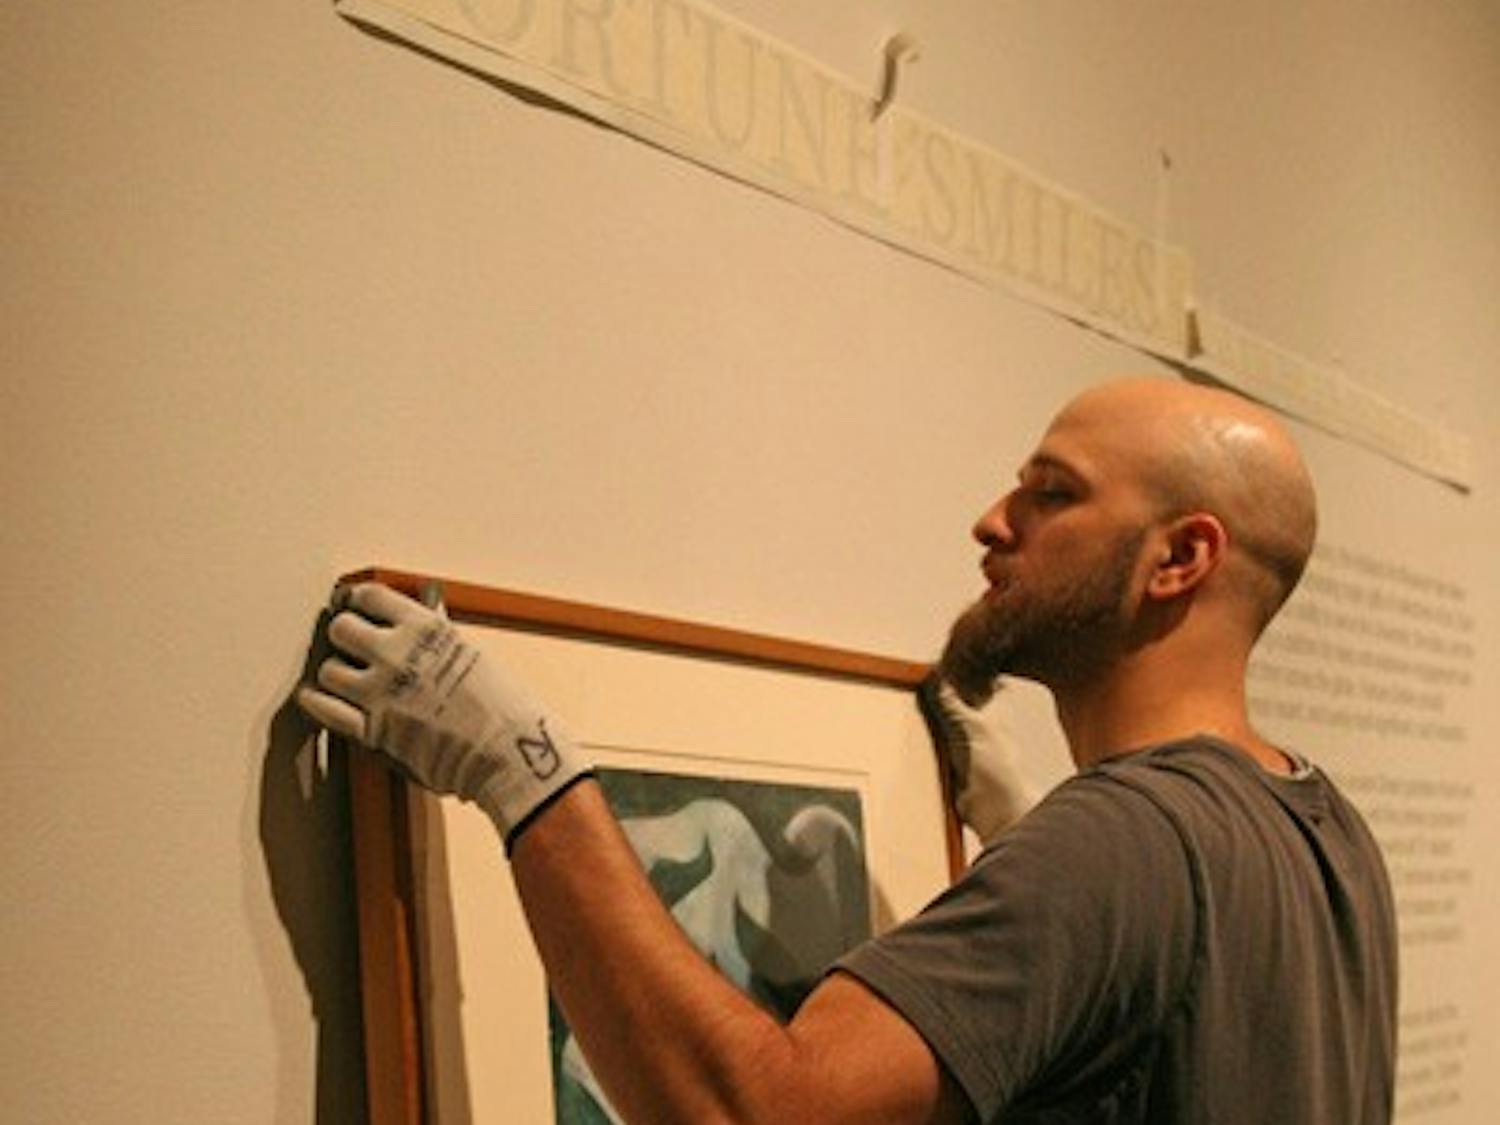 Ackland Art Museum preparator Andrew Nagy hangs a painting for a new exhibit. DTH/Becca Brenner